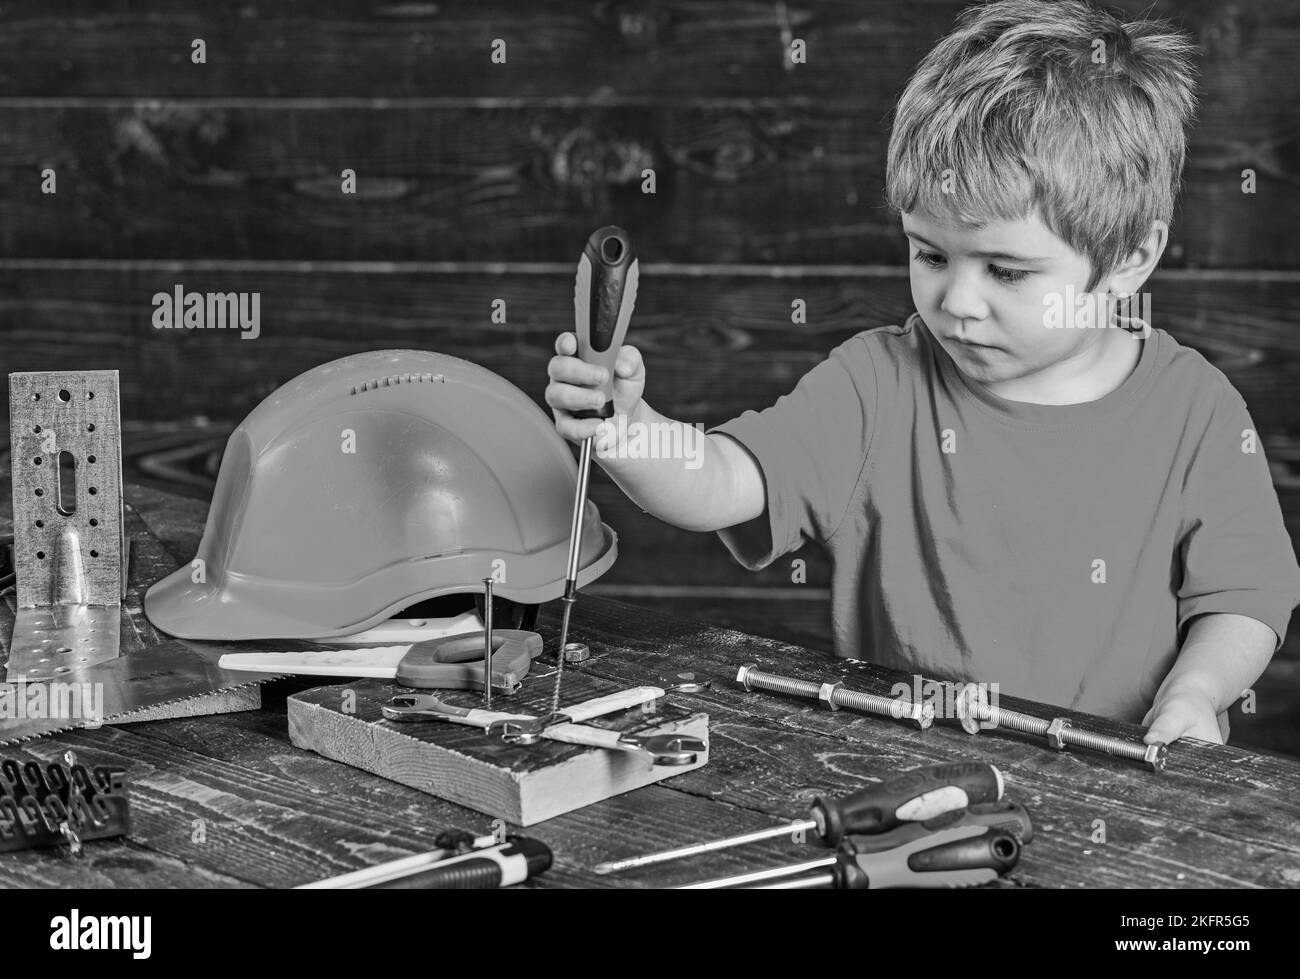 Concentrated kid binding screws to wooden board. Blond boy playing with tools set. Preschooler learning new skills Stock Photo